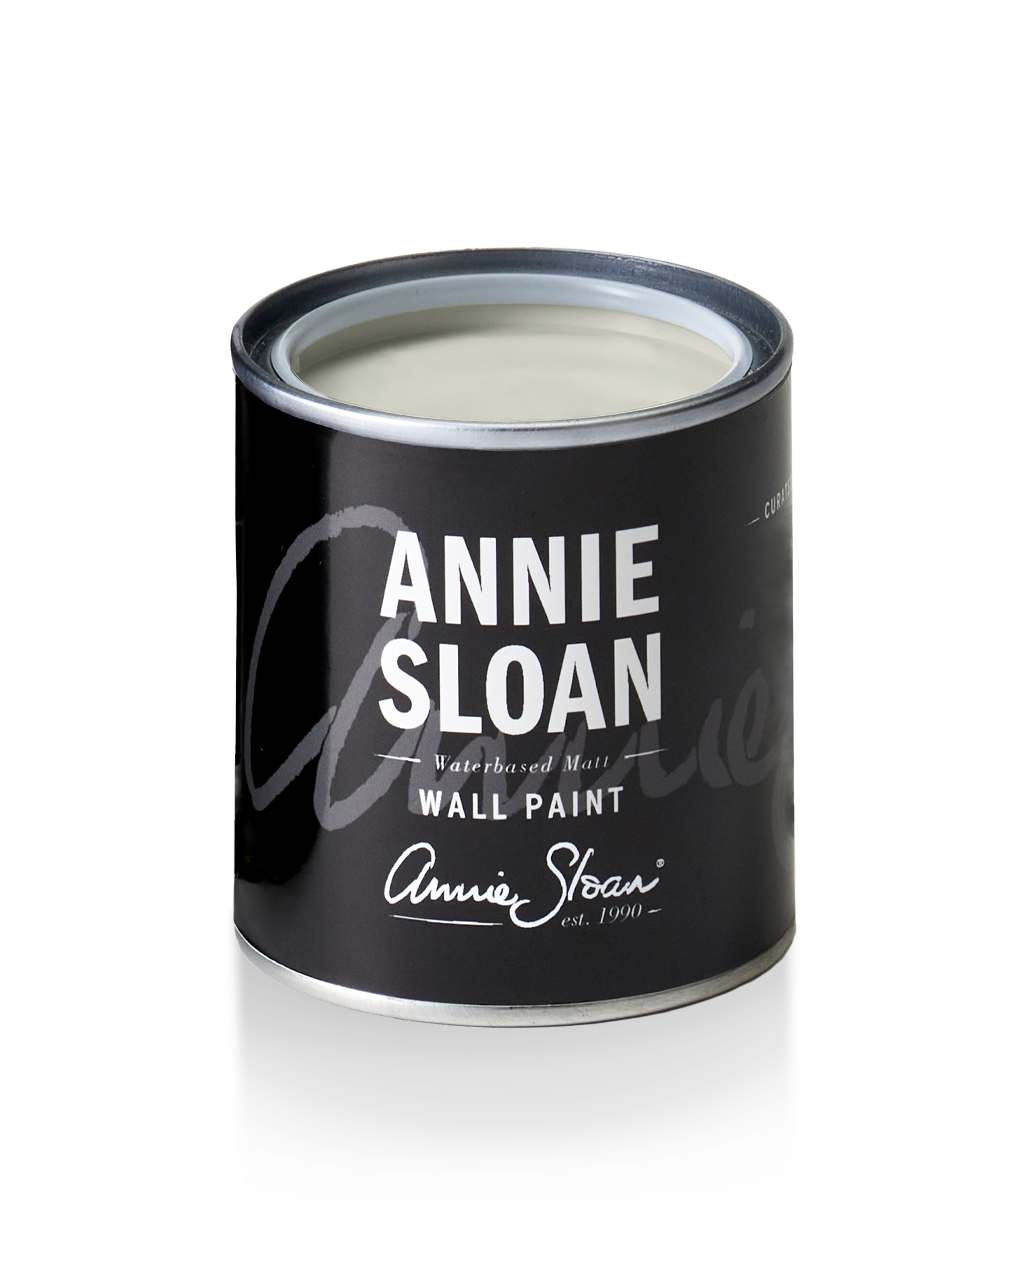 Doric wall paint in 120ml tin by Annie Sloan